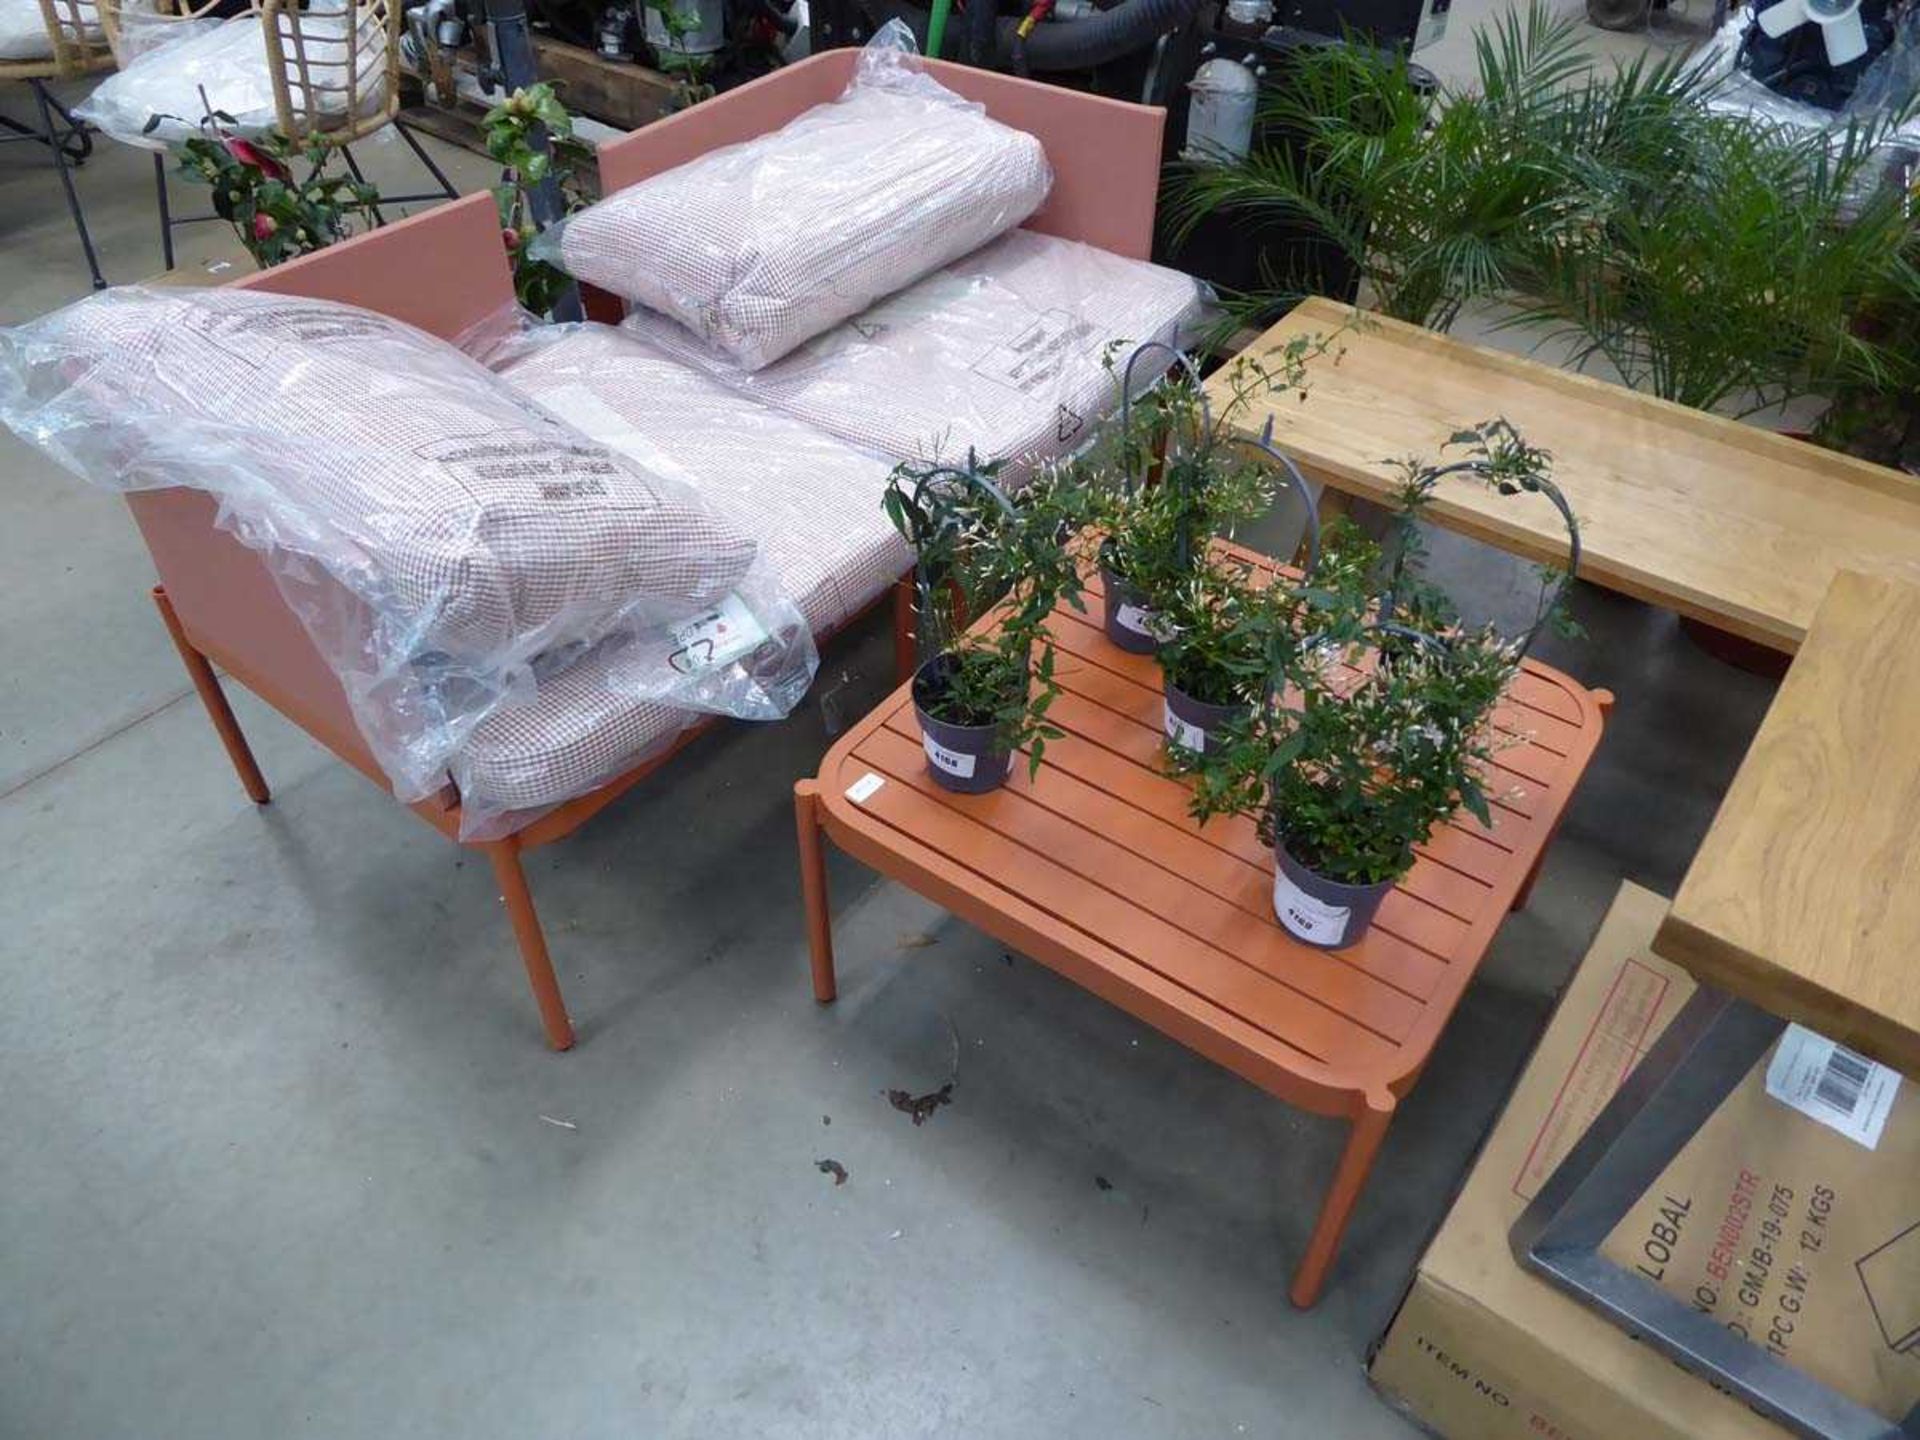 2 orange garden seats which make a bench and square metal table